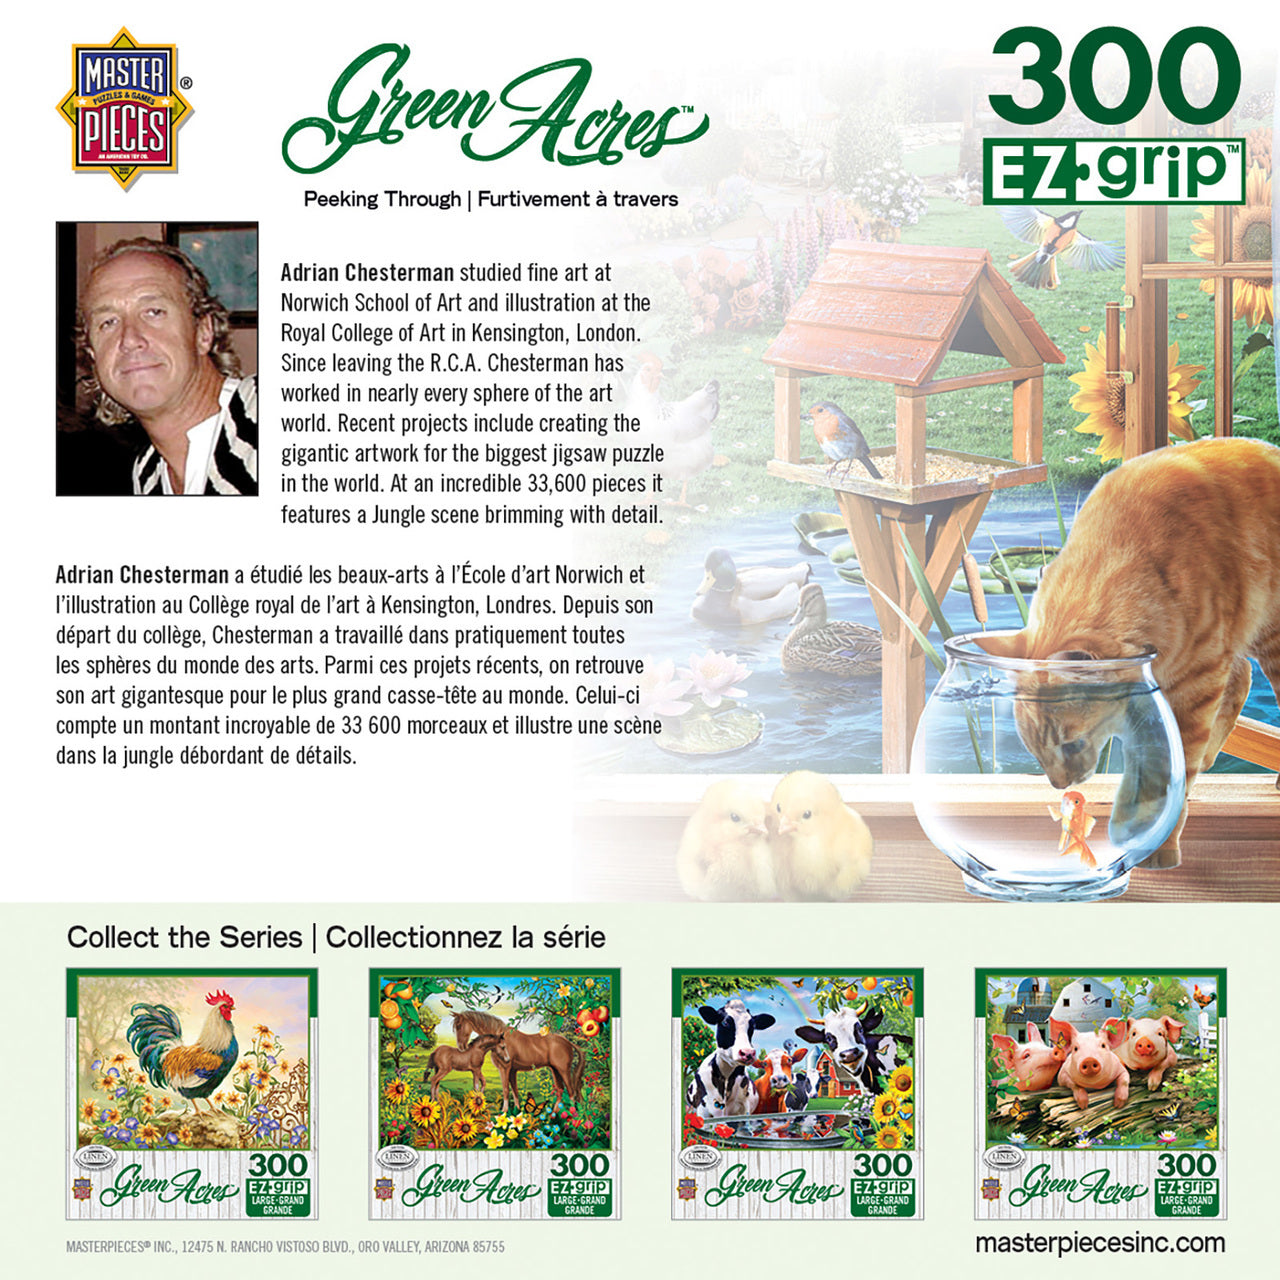 Green Acres Linen - Farmland Frolic Large 300 Piece EZGrip Jigsaw Puzzle by Masterpieces